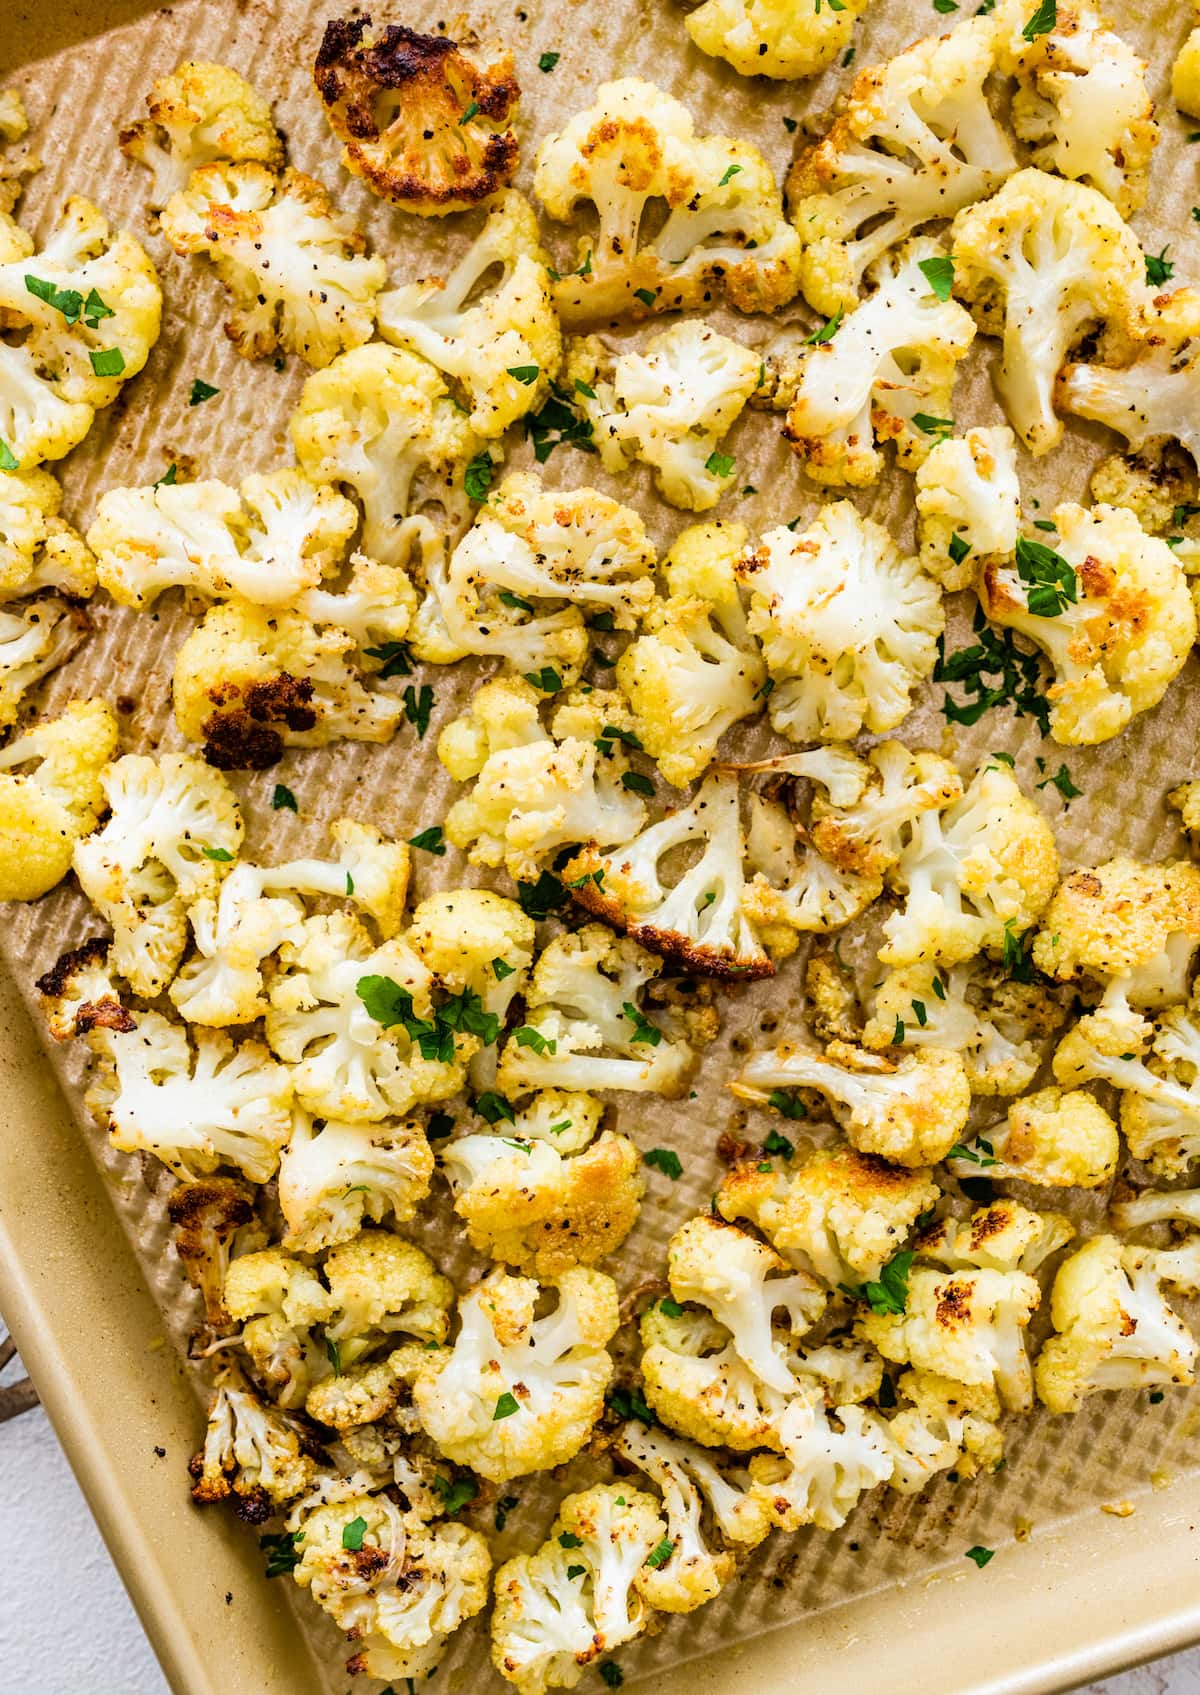 Roasted cauliflower on a baking sheet topped with fresh parsley.